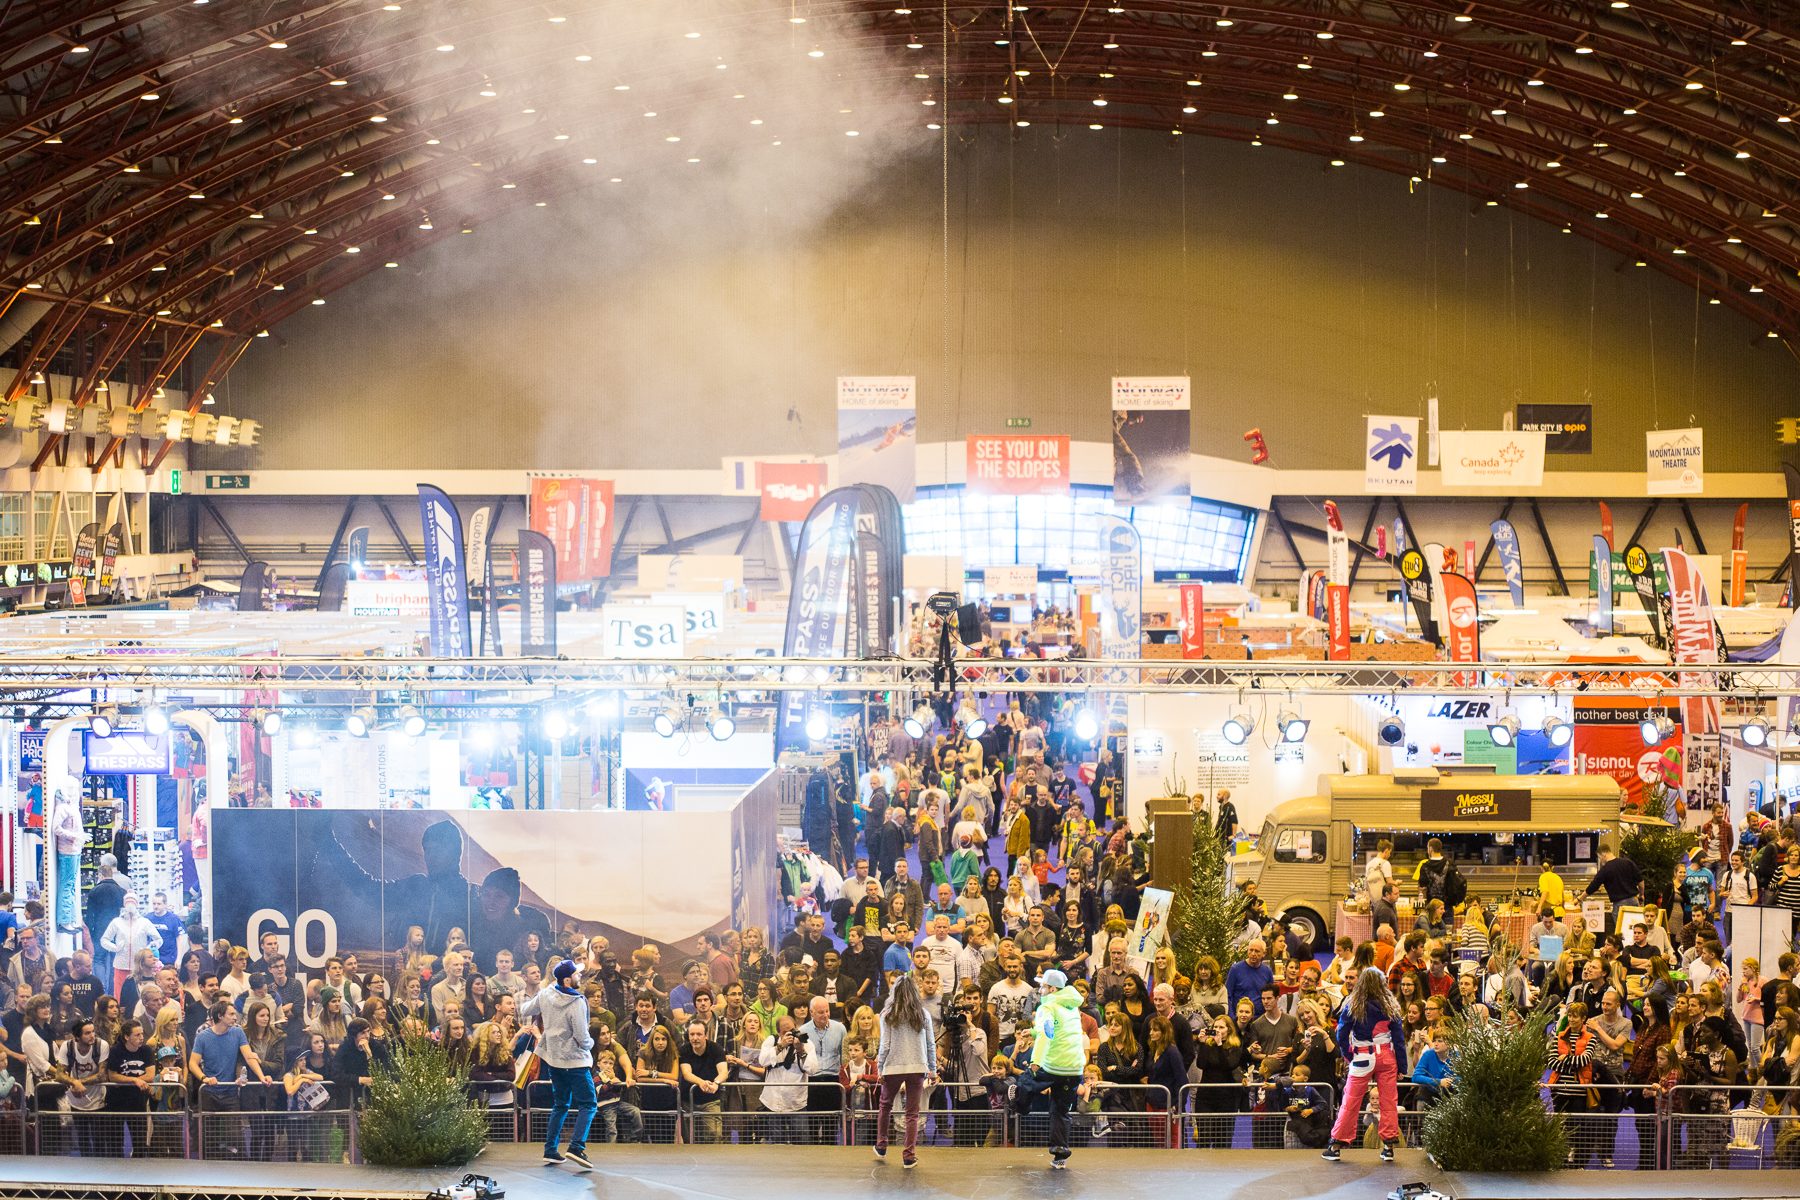 Manchester Ski Show Not Happening This Autumn Inthesnow intended for Ski And Snowboard Show Glasgow 2014